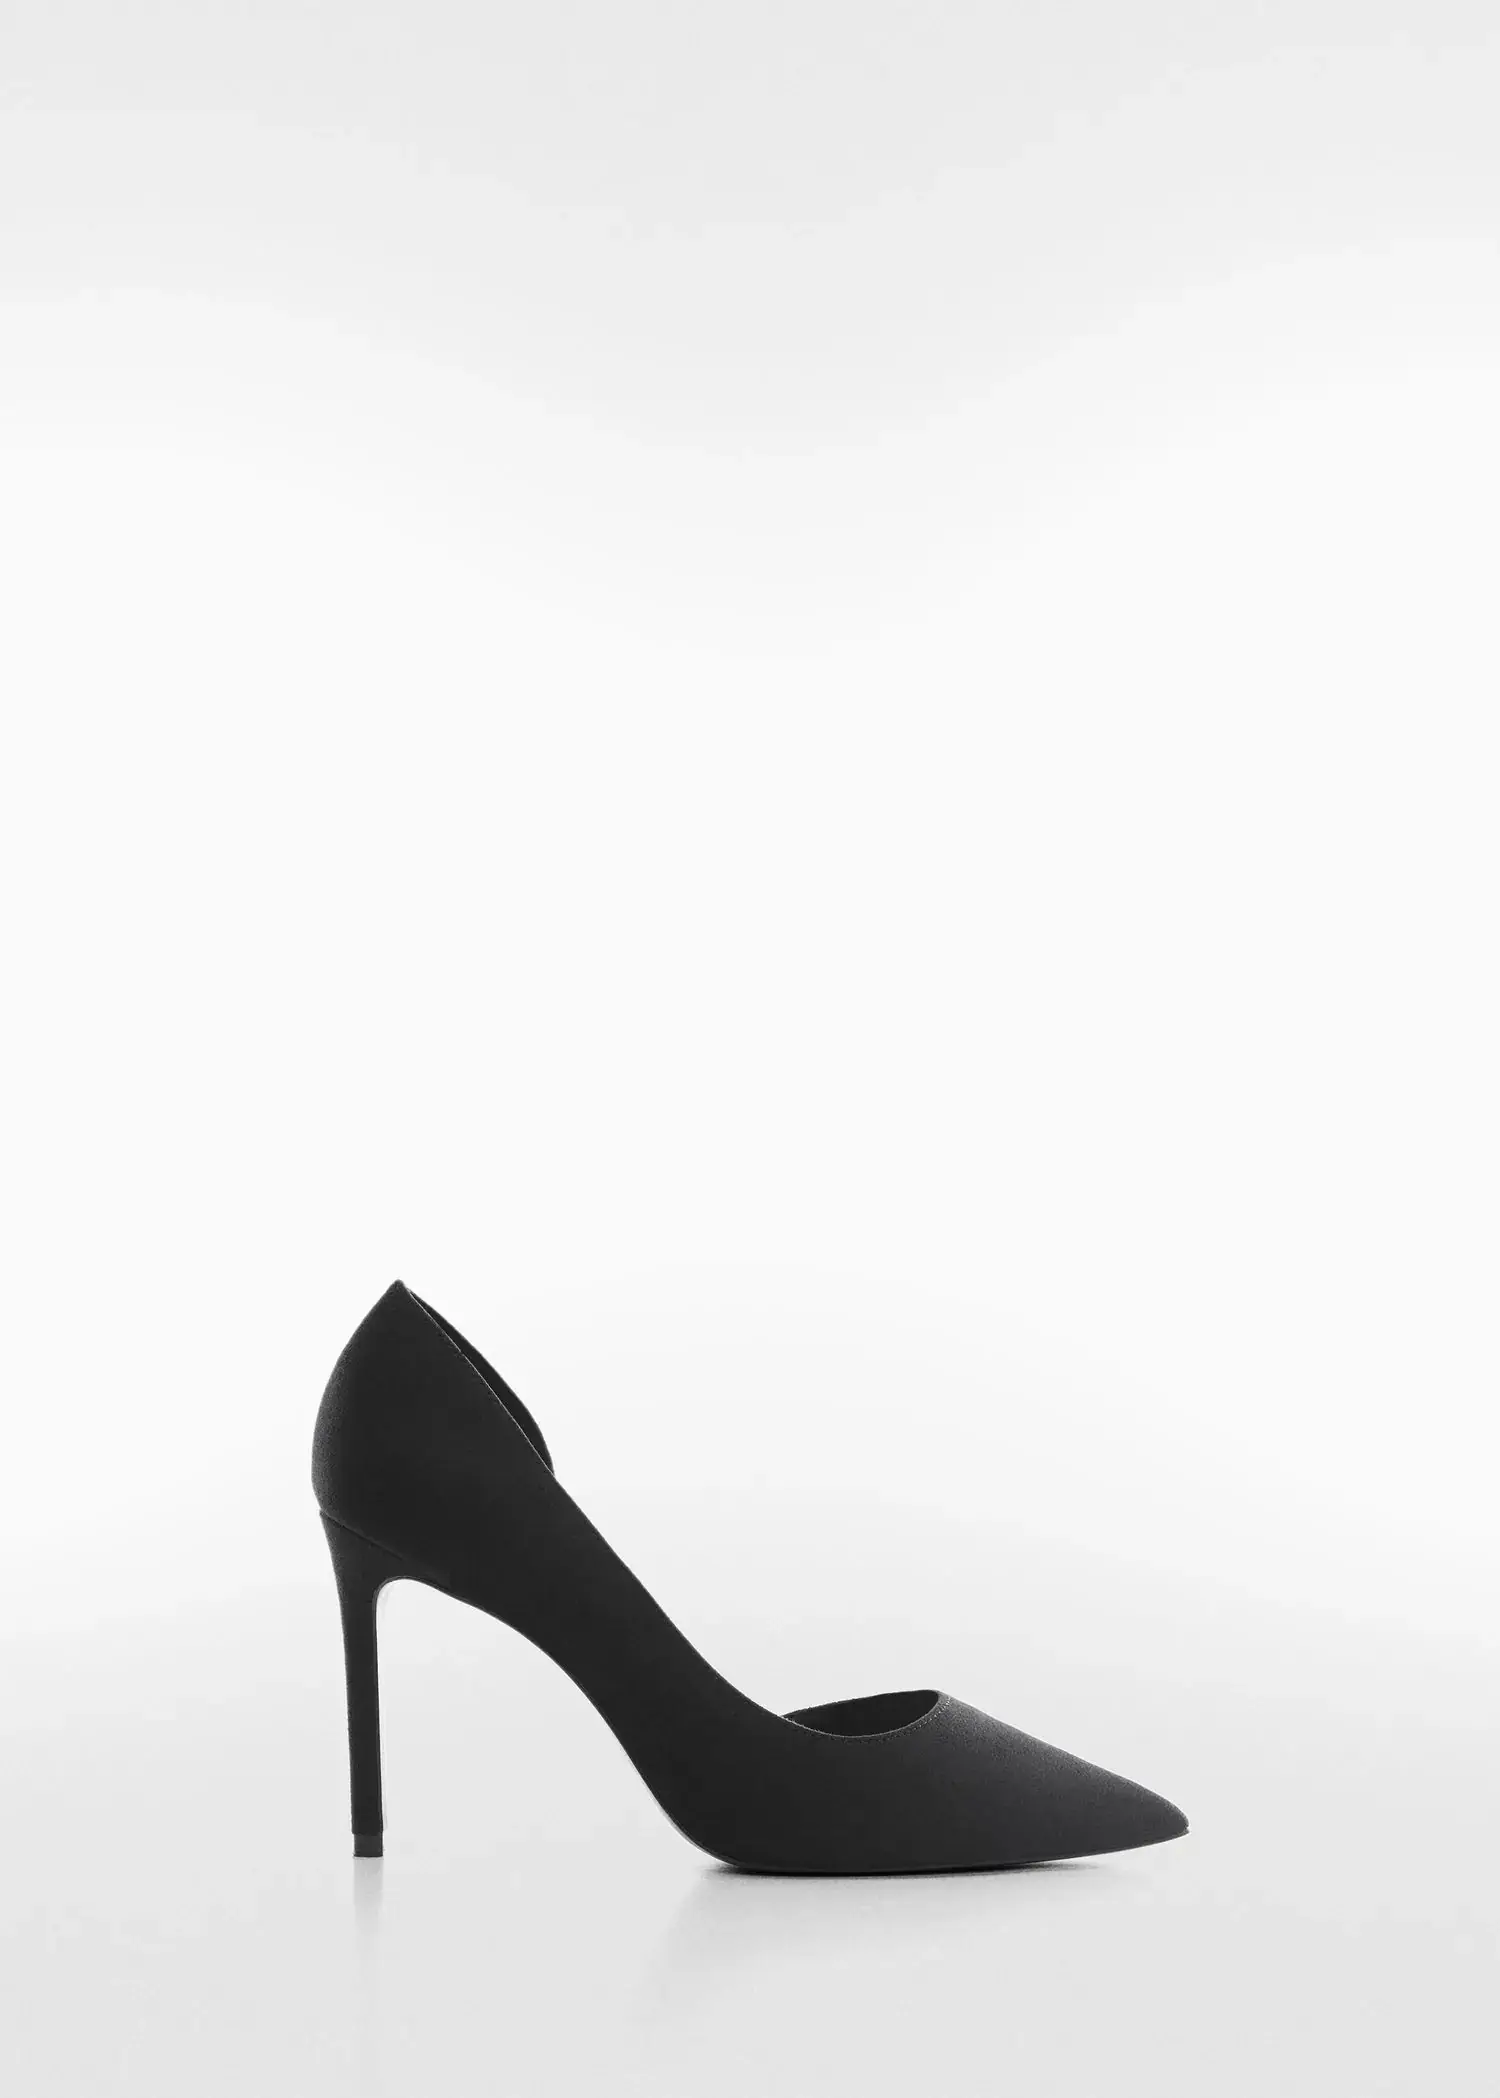 Mango Asymmetrical heeled shoes. a pair of black high heels on a white background. 